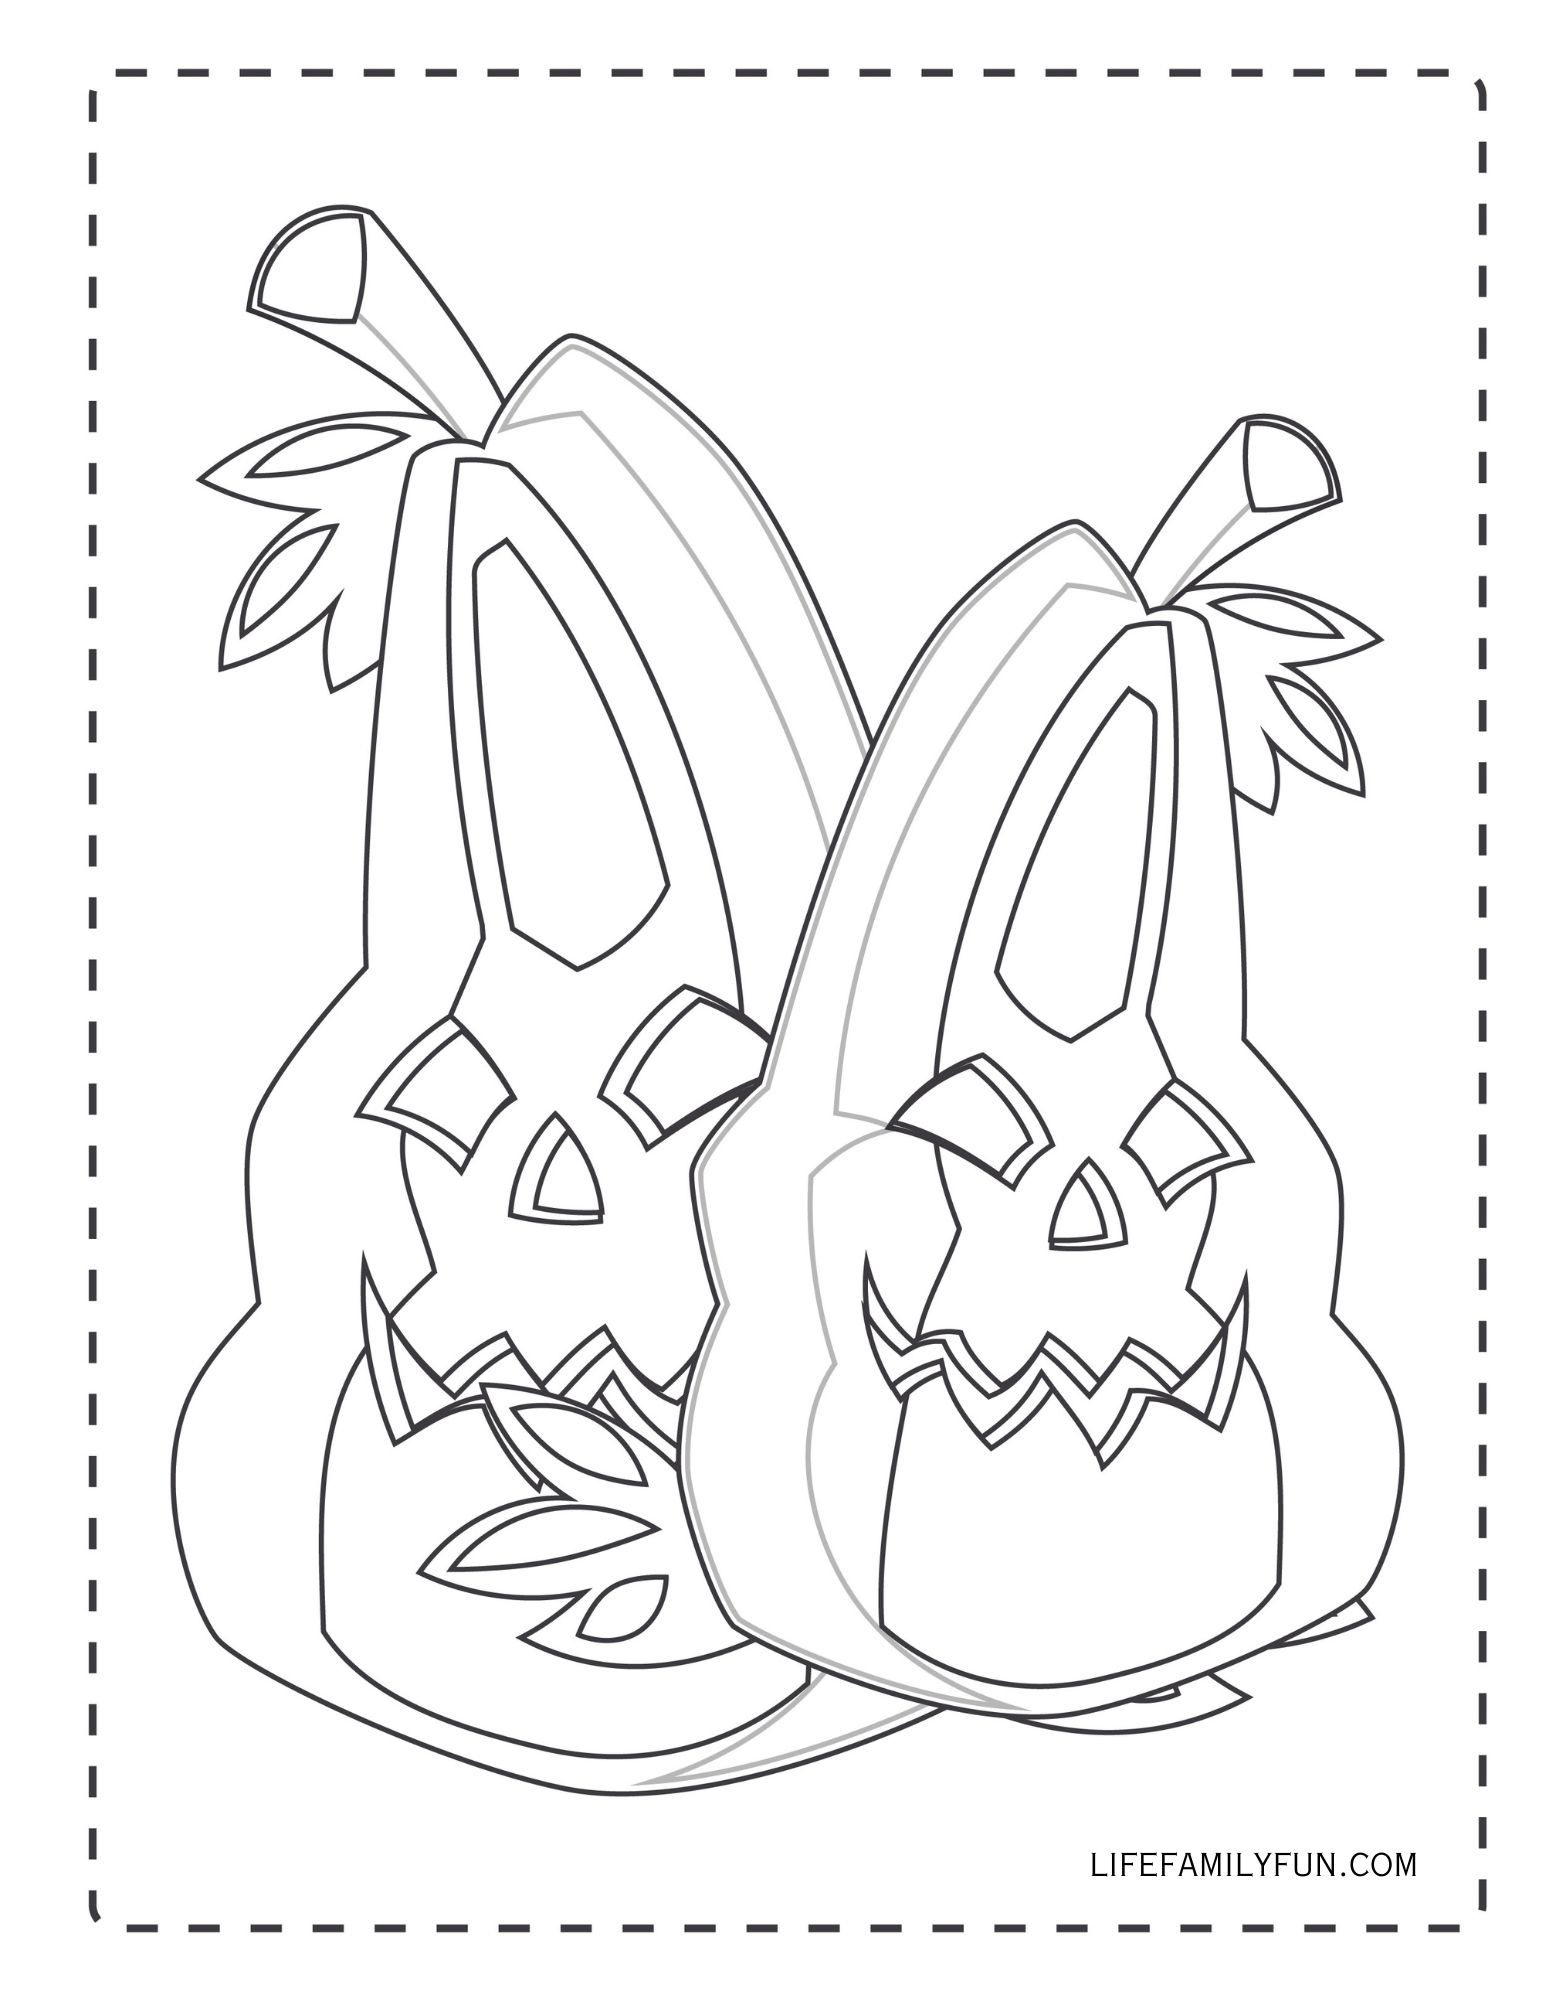 Not traditional Halloween Pumpkin Coloring Page